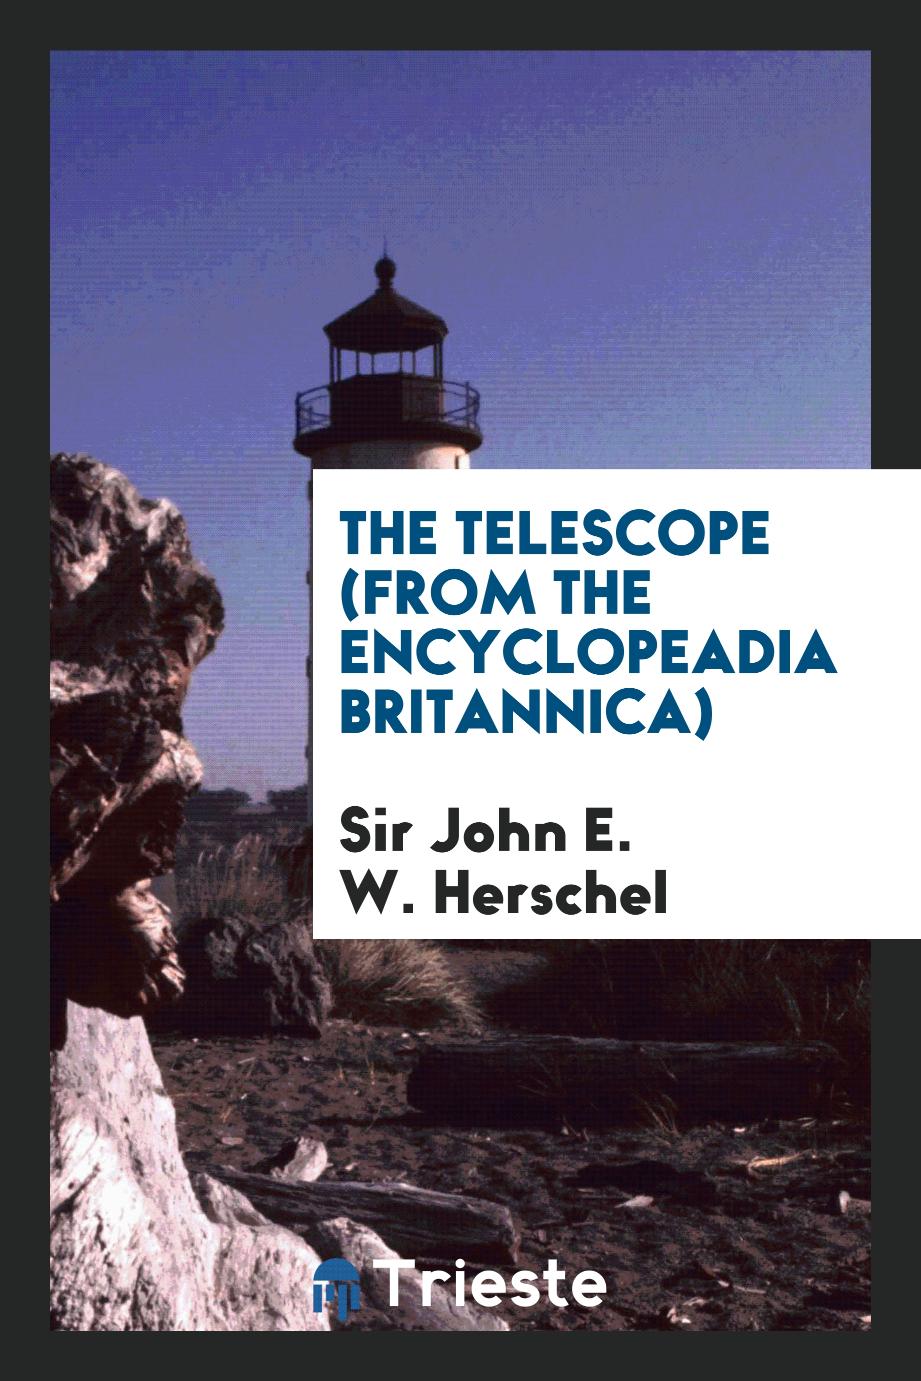 The Telescope (from the Encyclopeadia Britannica)